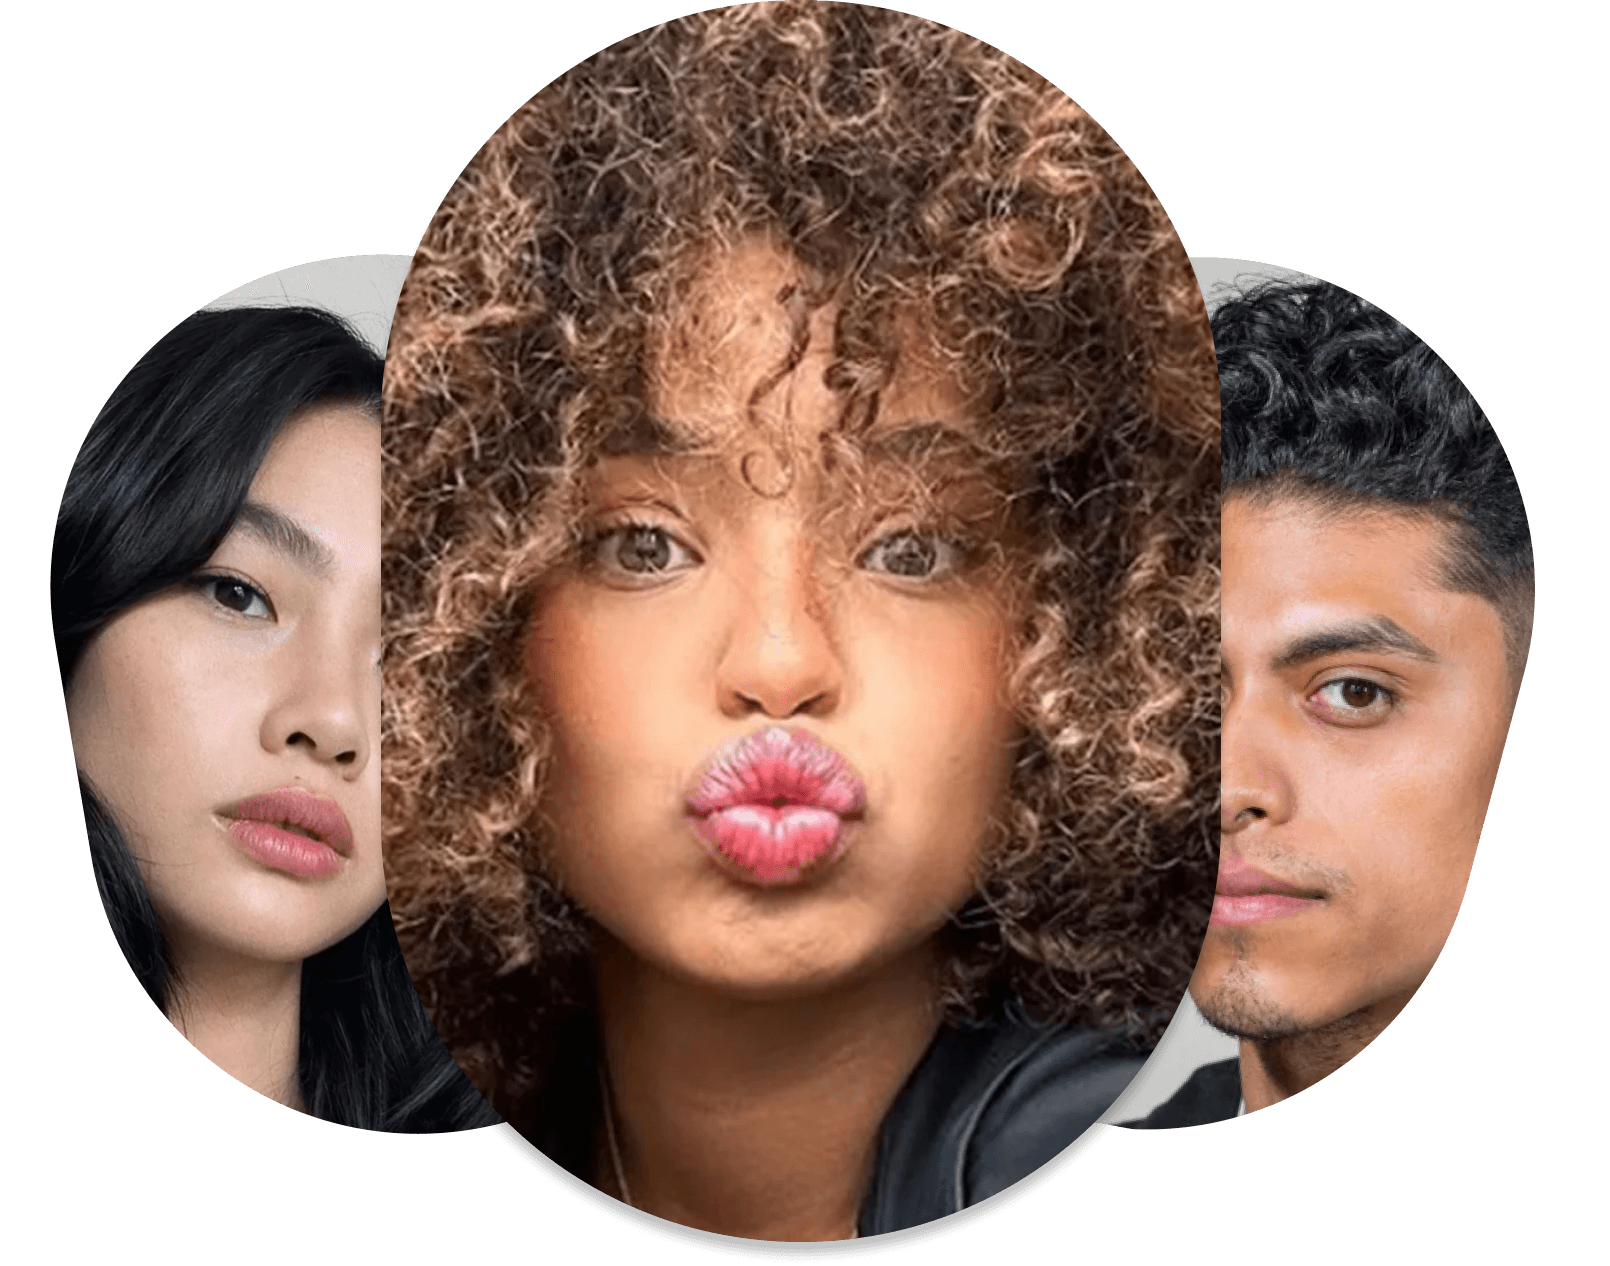 Diverse models with curly hair